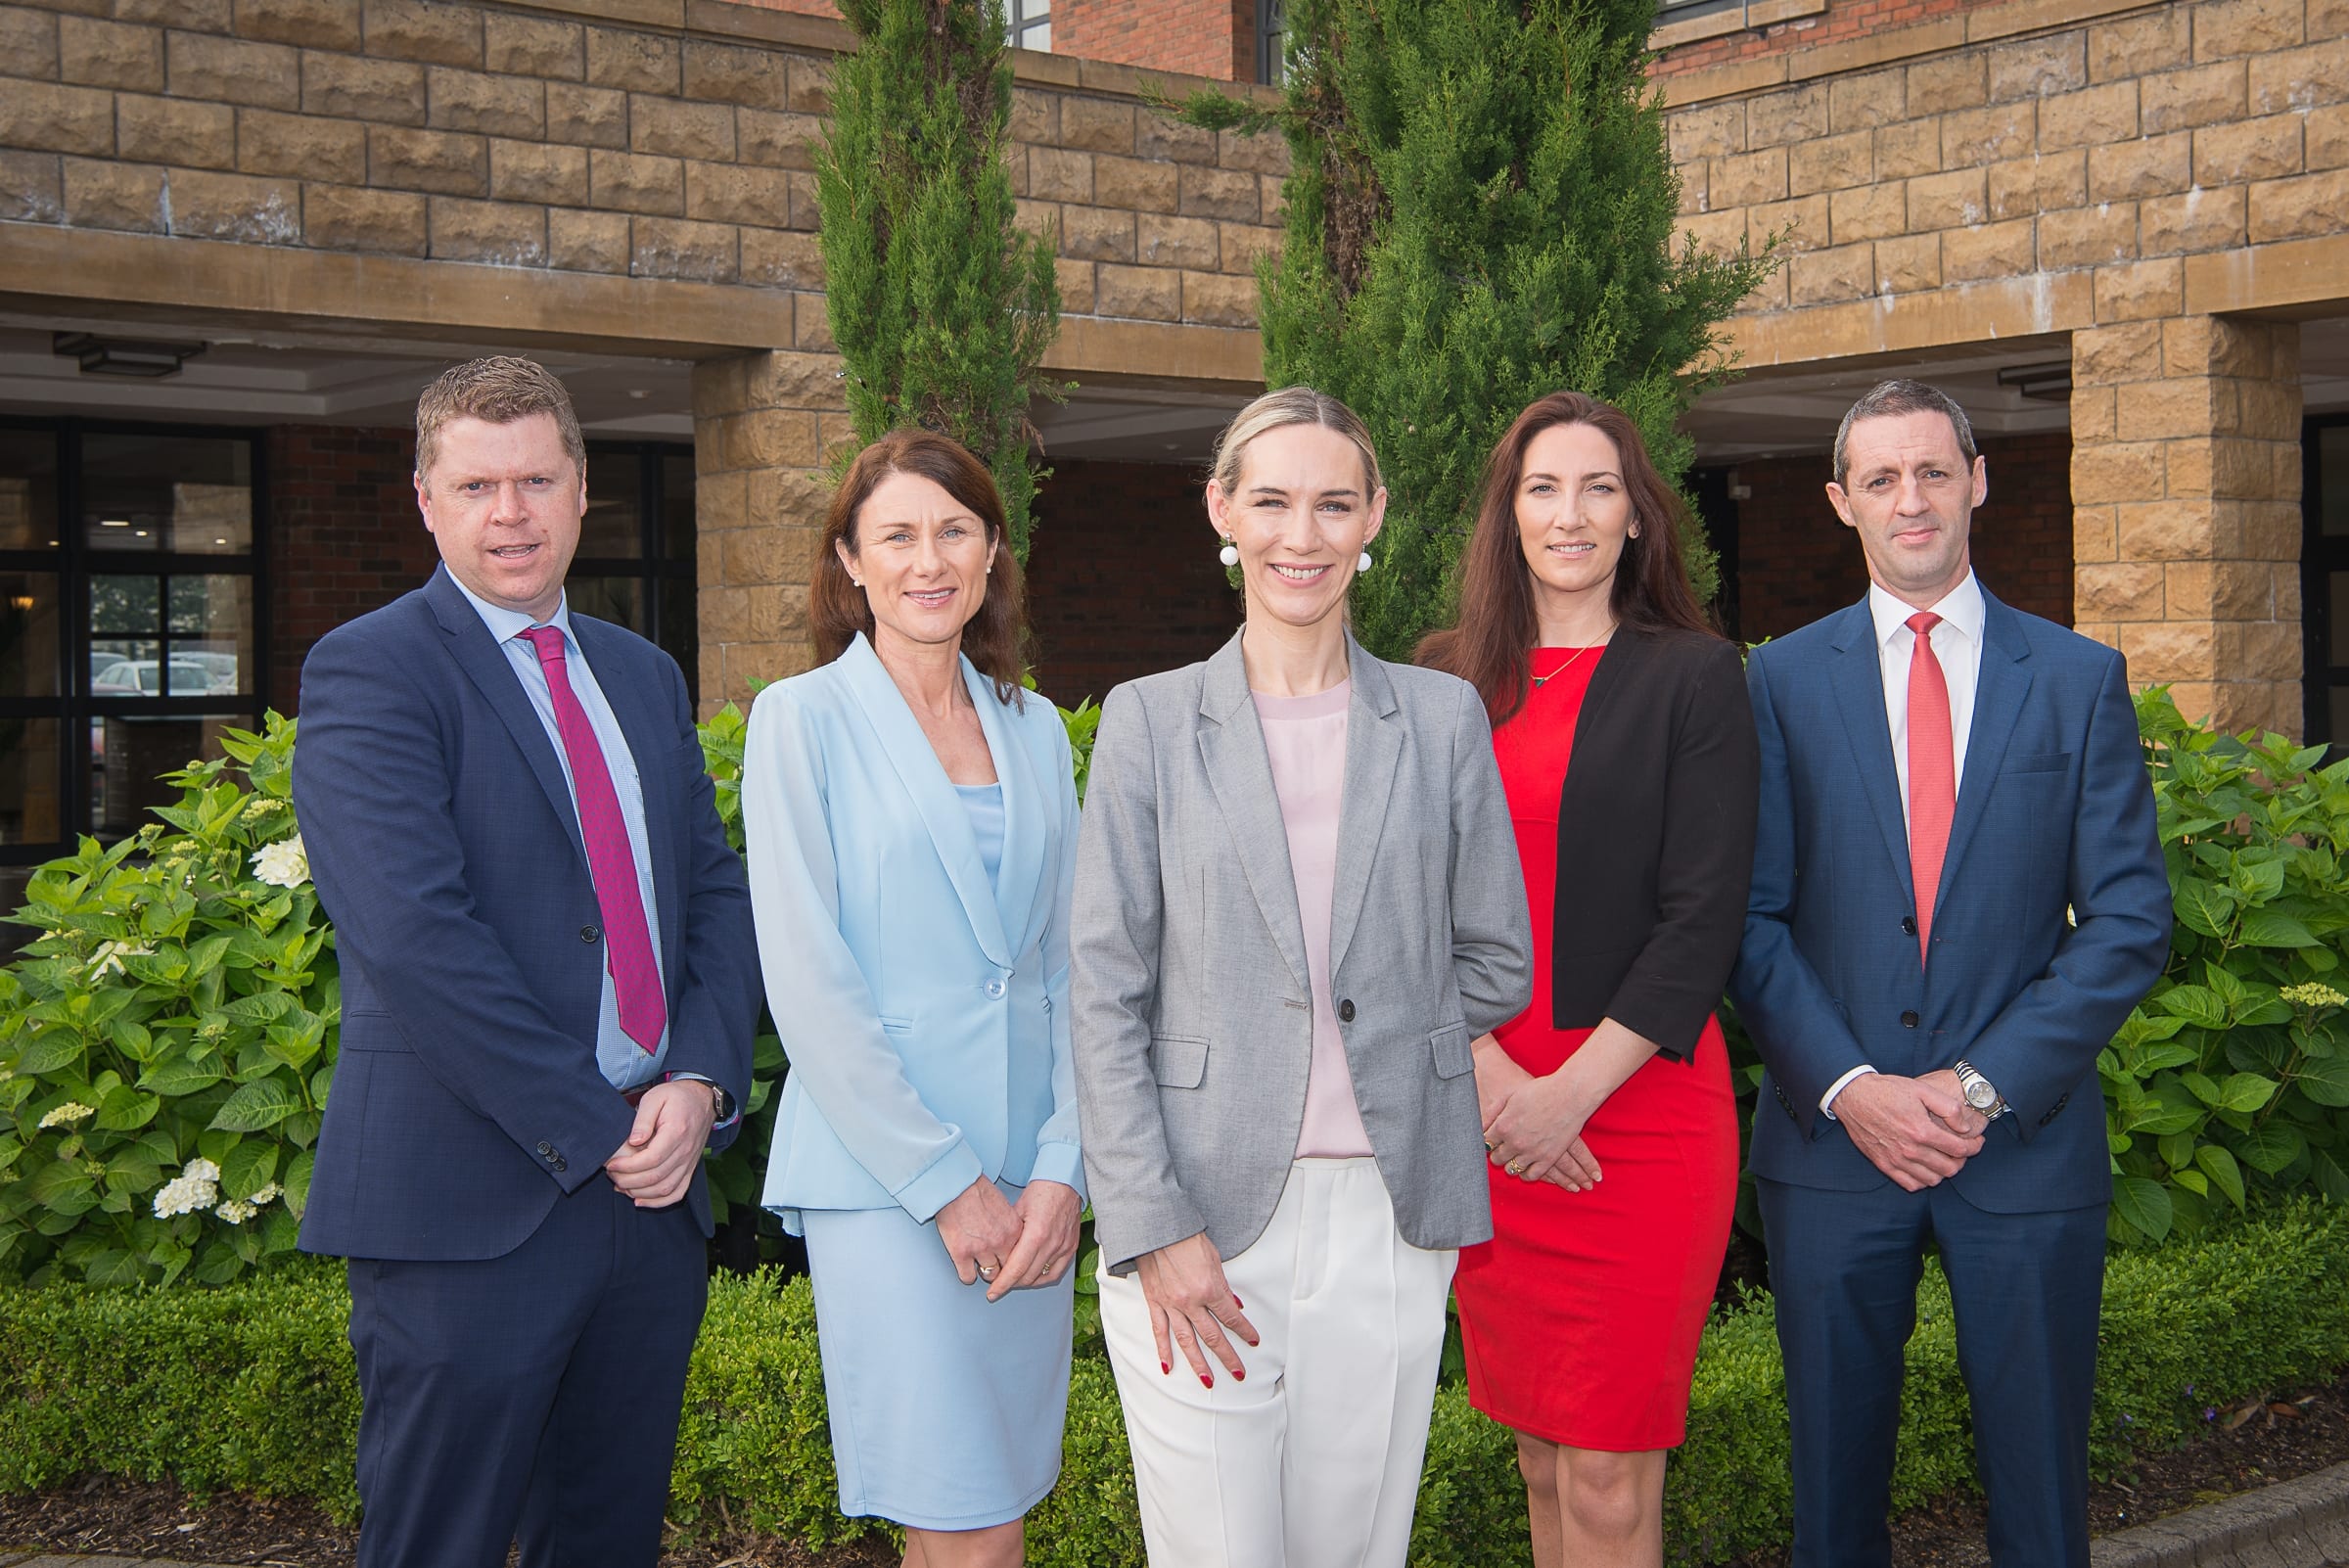 From Left to Right:  Launch of Limerick Chamber President Awards held in the Castletroy Park Hotel on 25th June 2019: Eoin Ryan - Limerick Chamber President / HLBMGR, Mary Considine - Acting CEO Shannon Group, Deirdre Ryan - CEO Limerick Chamber, Gillian Barry -  LIT, Kieran Considine, - AIB
Photo by Morning Star Photography